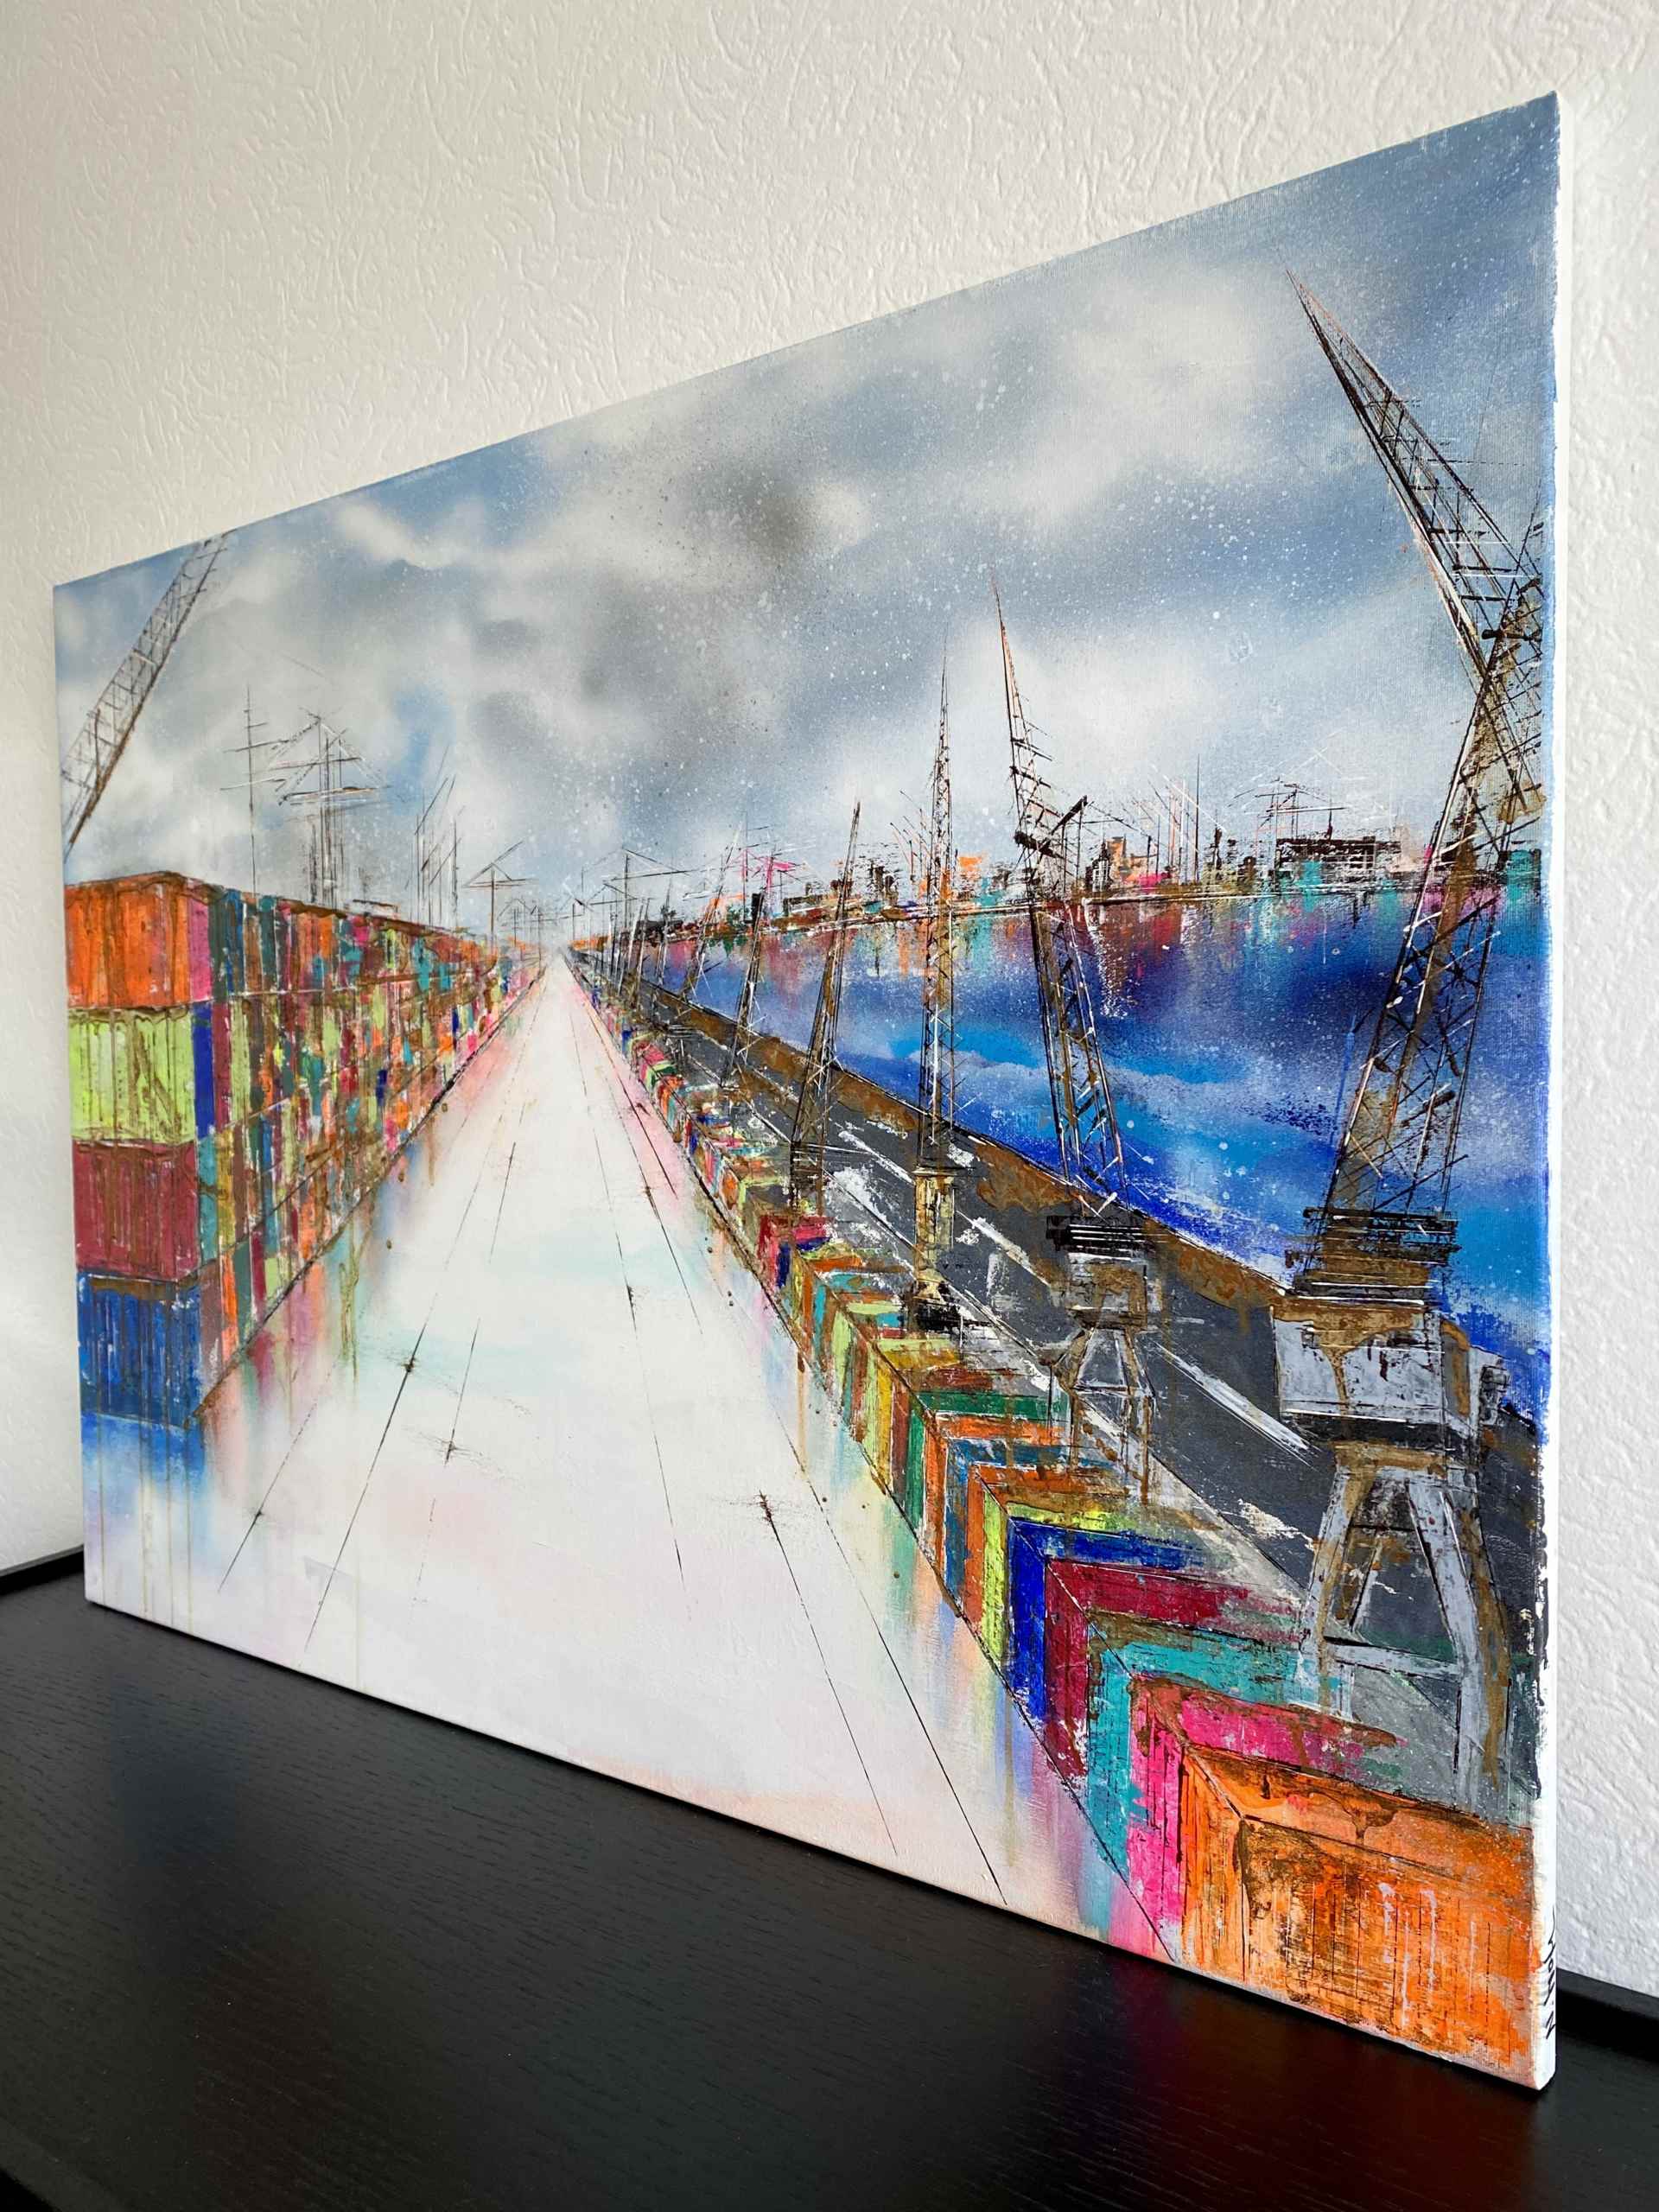 Side view of artwork "Dock No 7" by Nina Groth